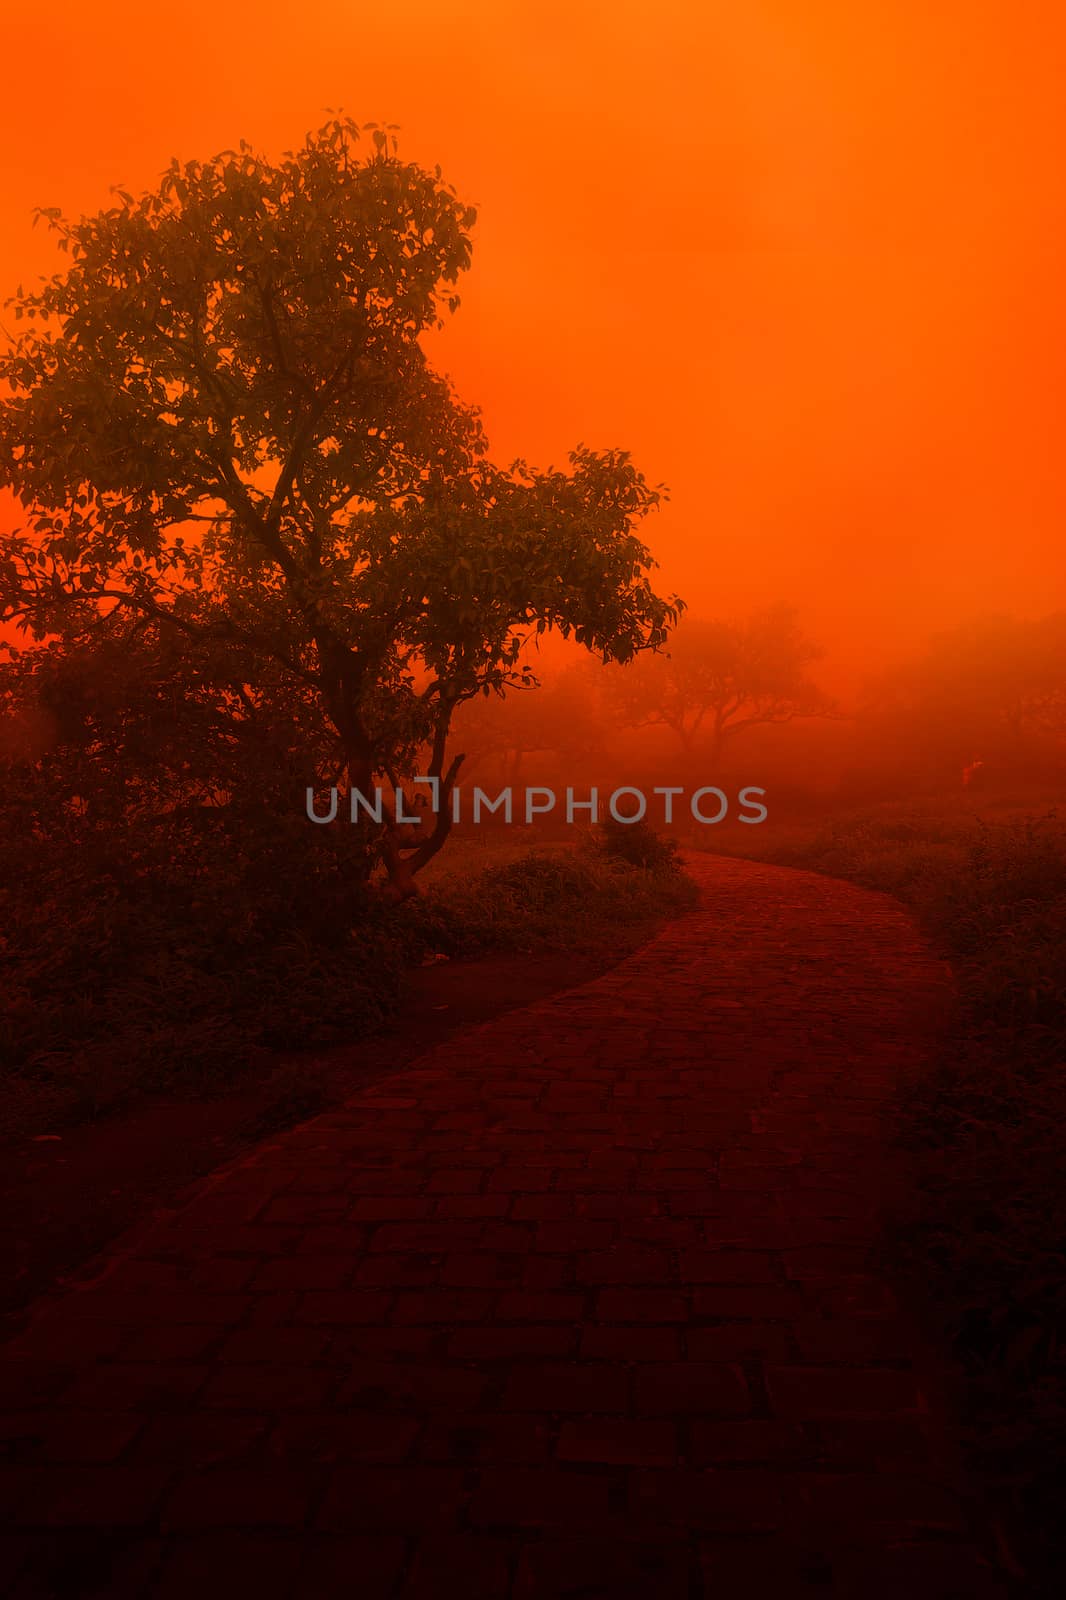 A mysterious old path during an evening with orange light and clouds touching the ground.                               